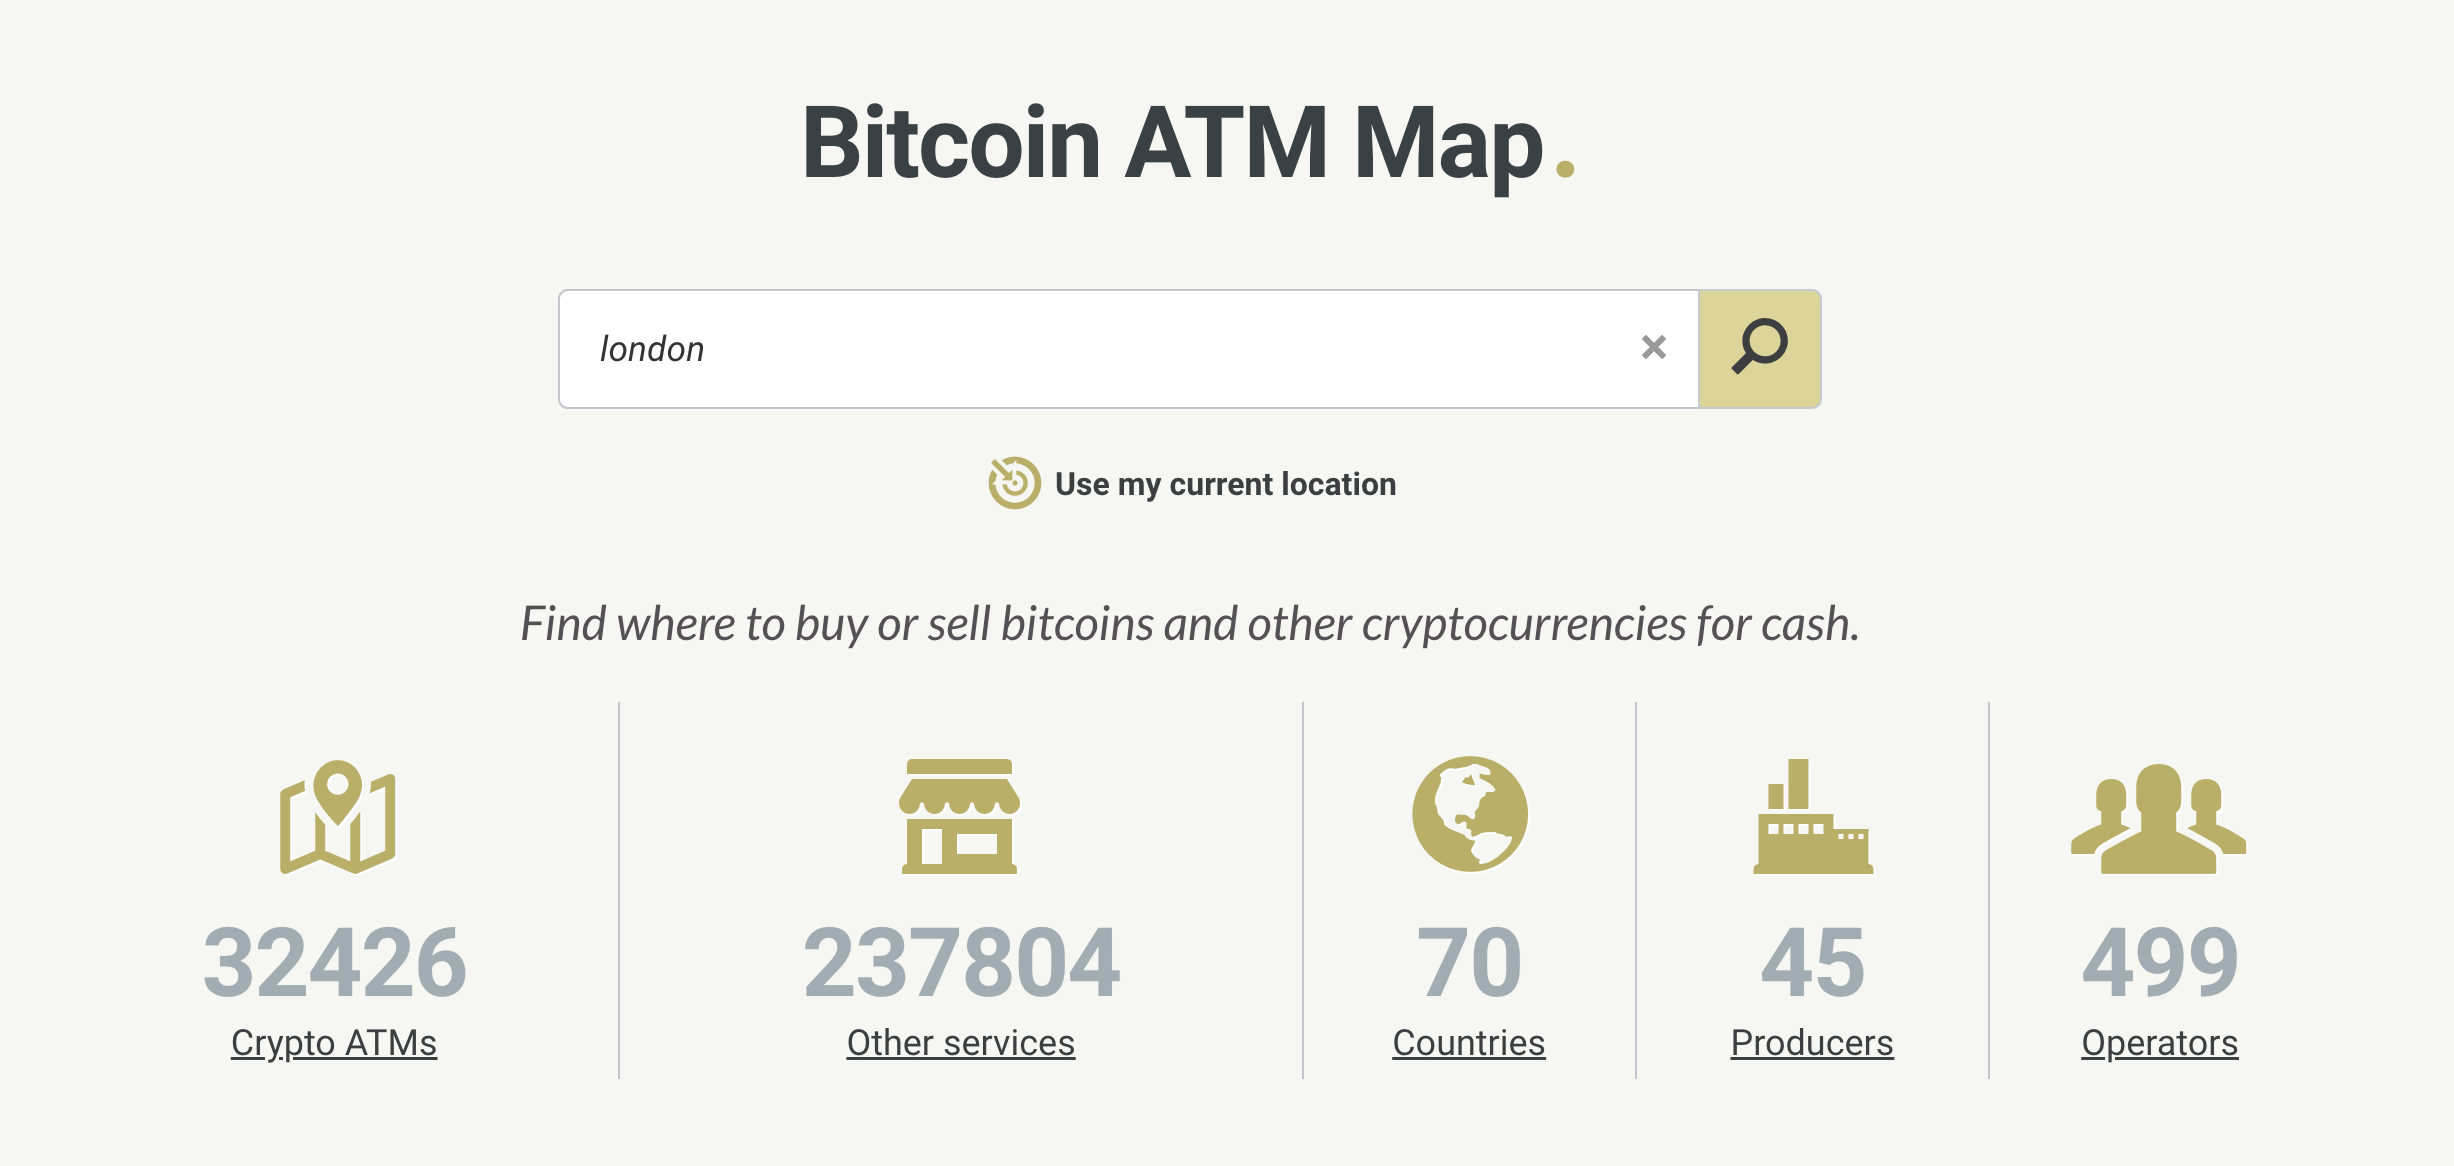 How to Buy Bitcoin Anonymously in the UK